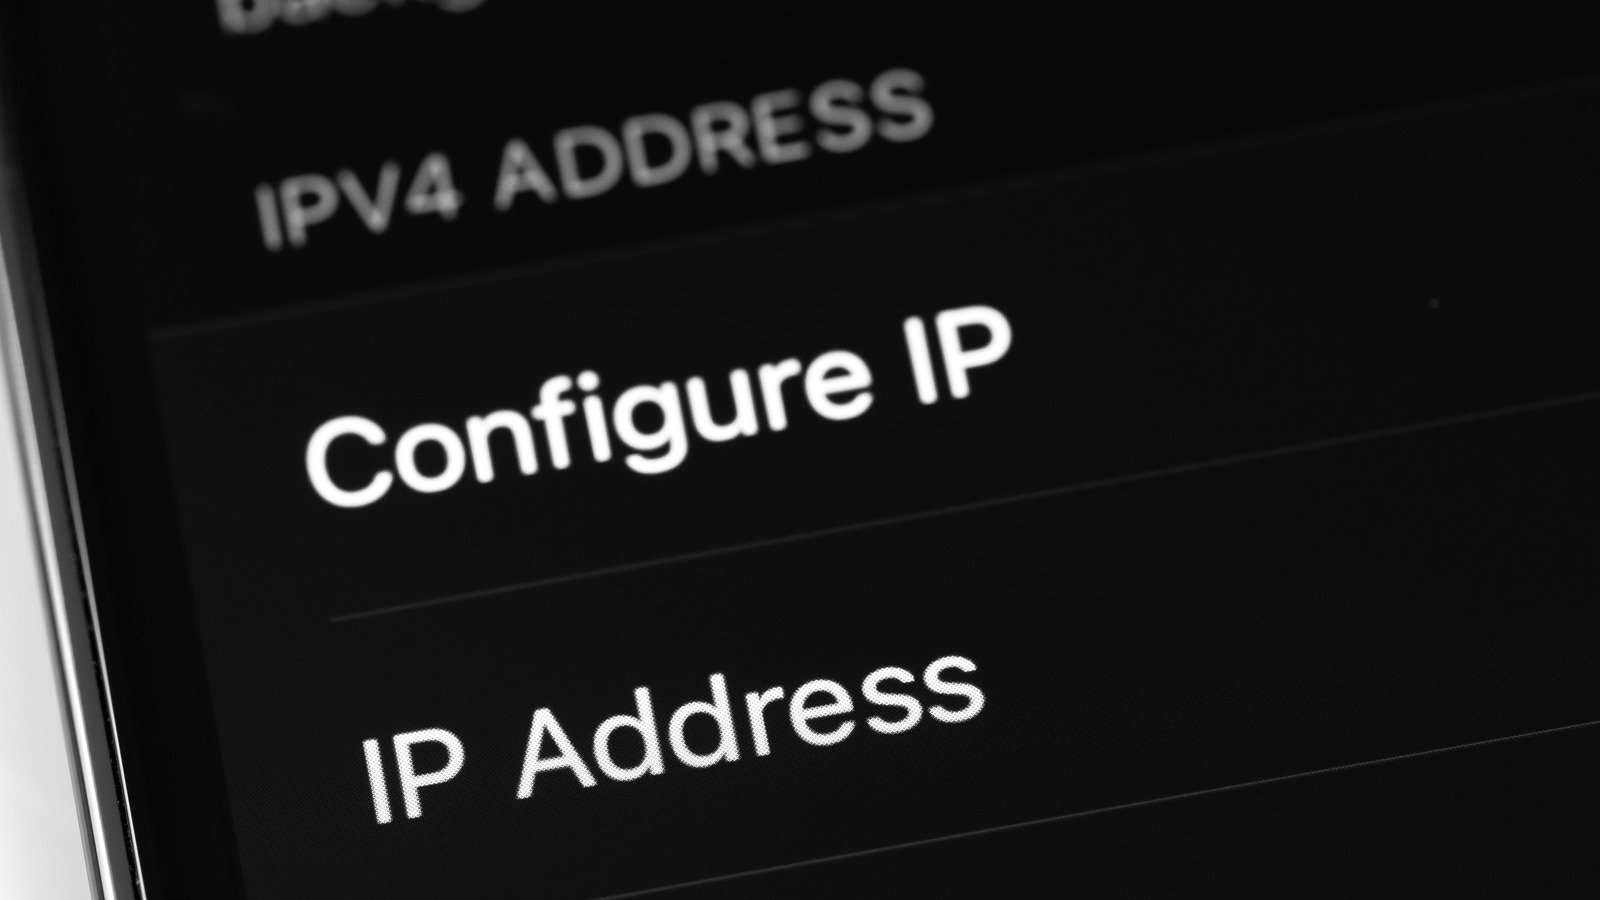 Quick Ways to Find the Owner of IP Address